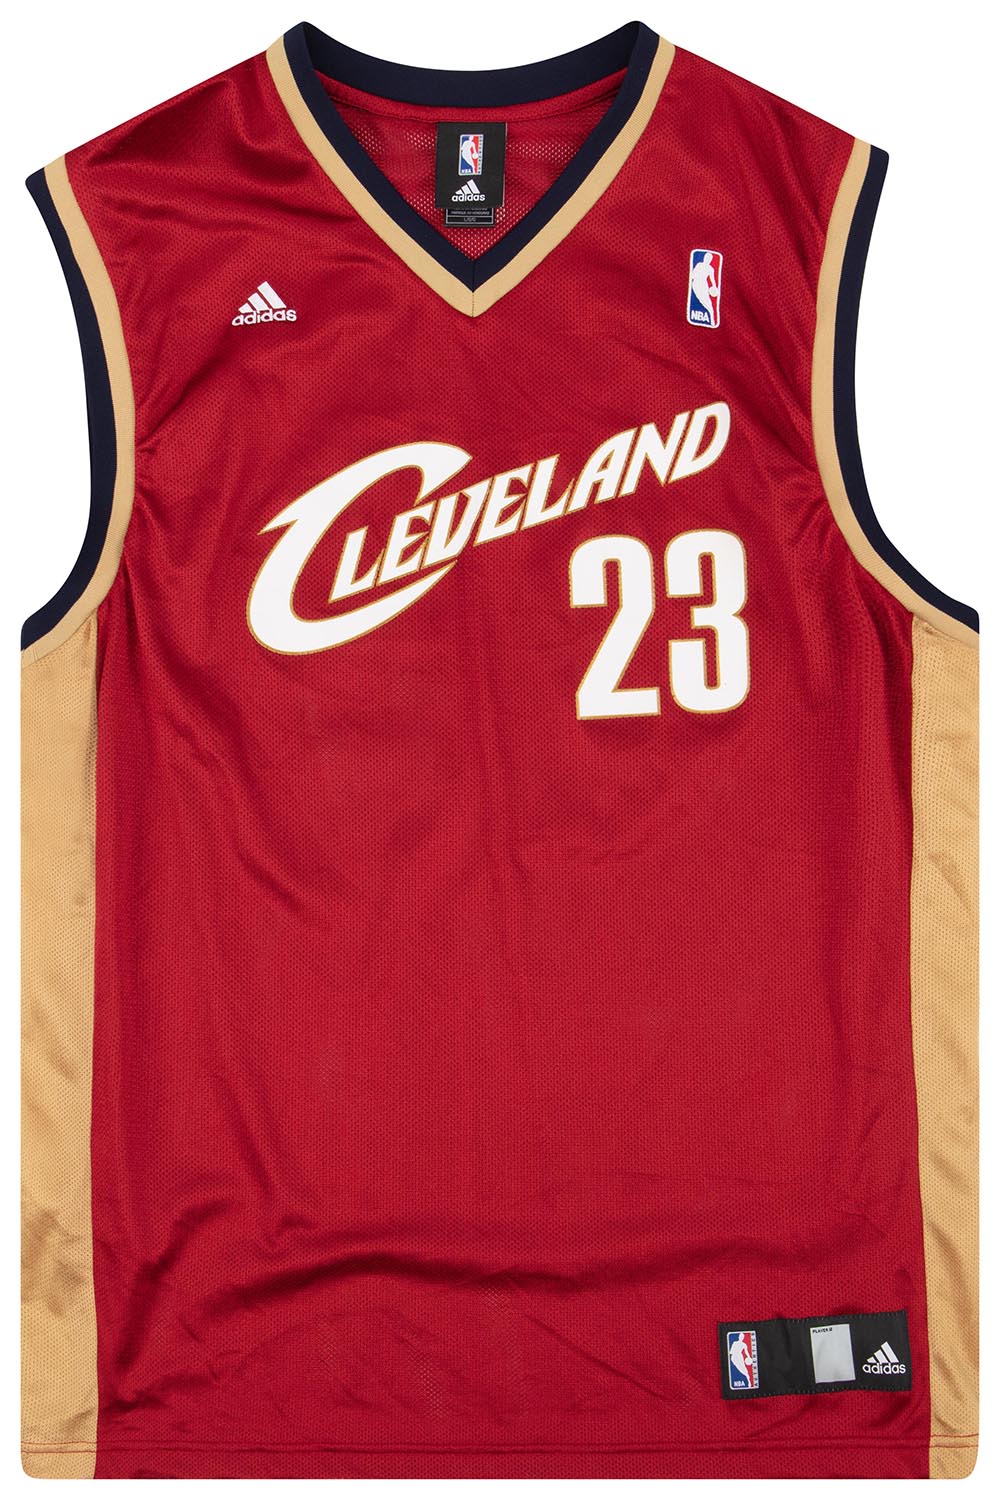 2006-10 CLEVELAND CAVALIERS JAMES #23 ADIDAS JERSEY (AWAY) M - Classic  American Sports